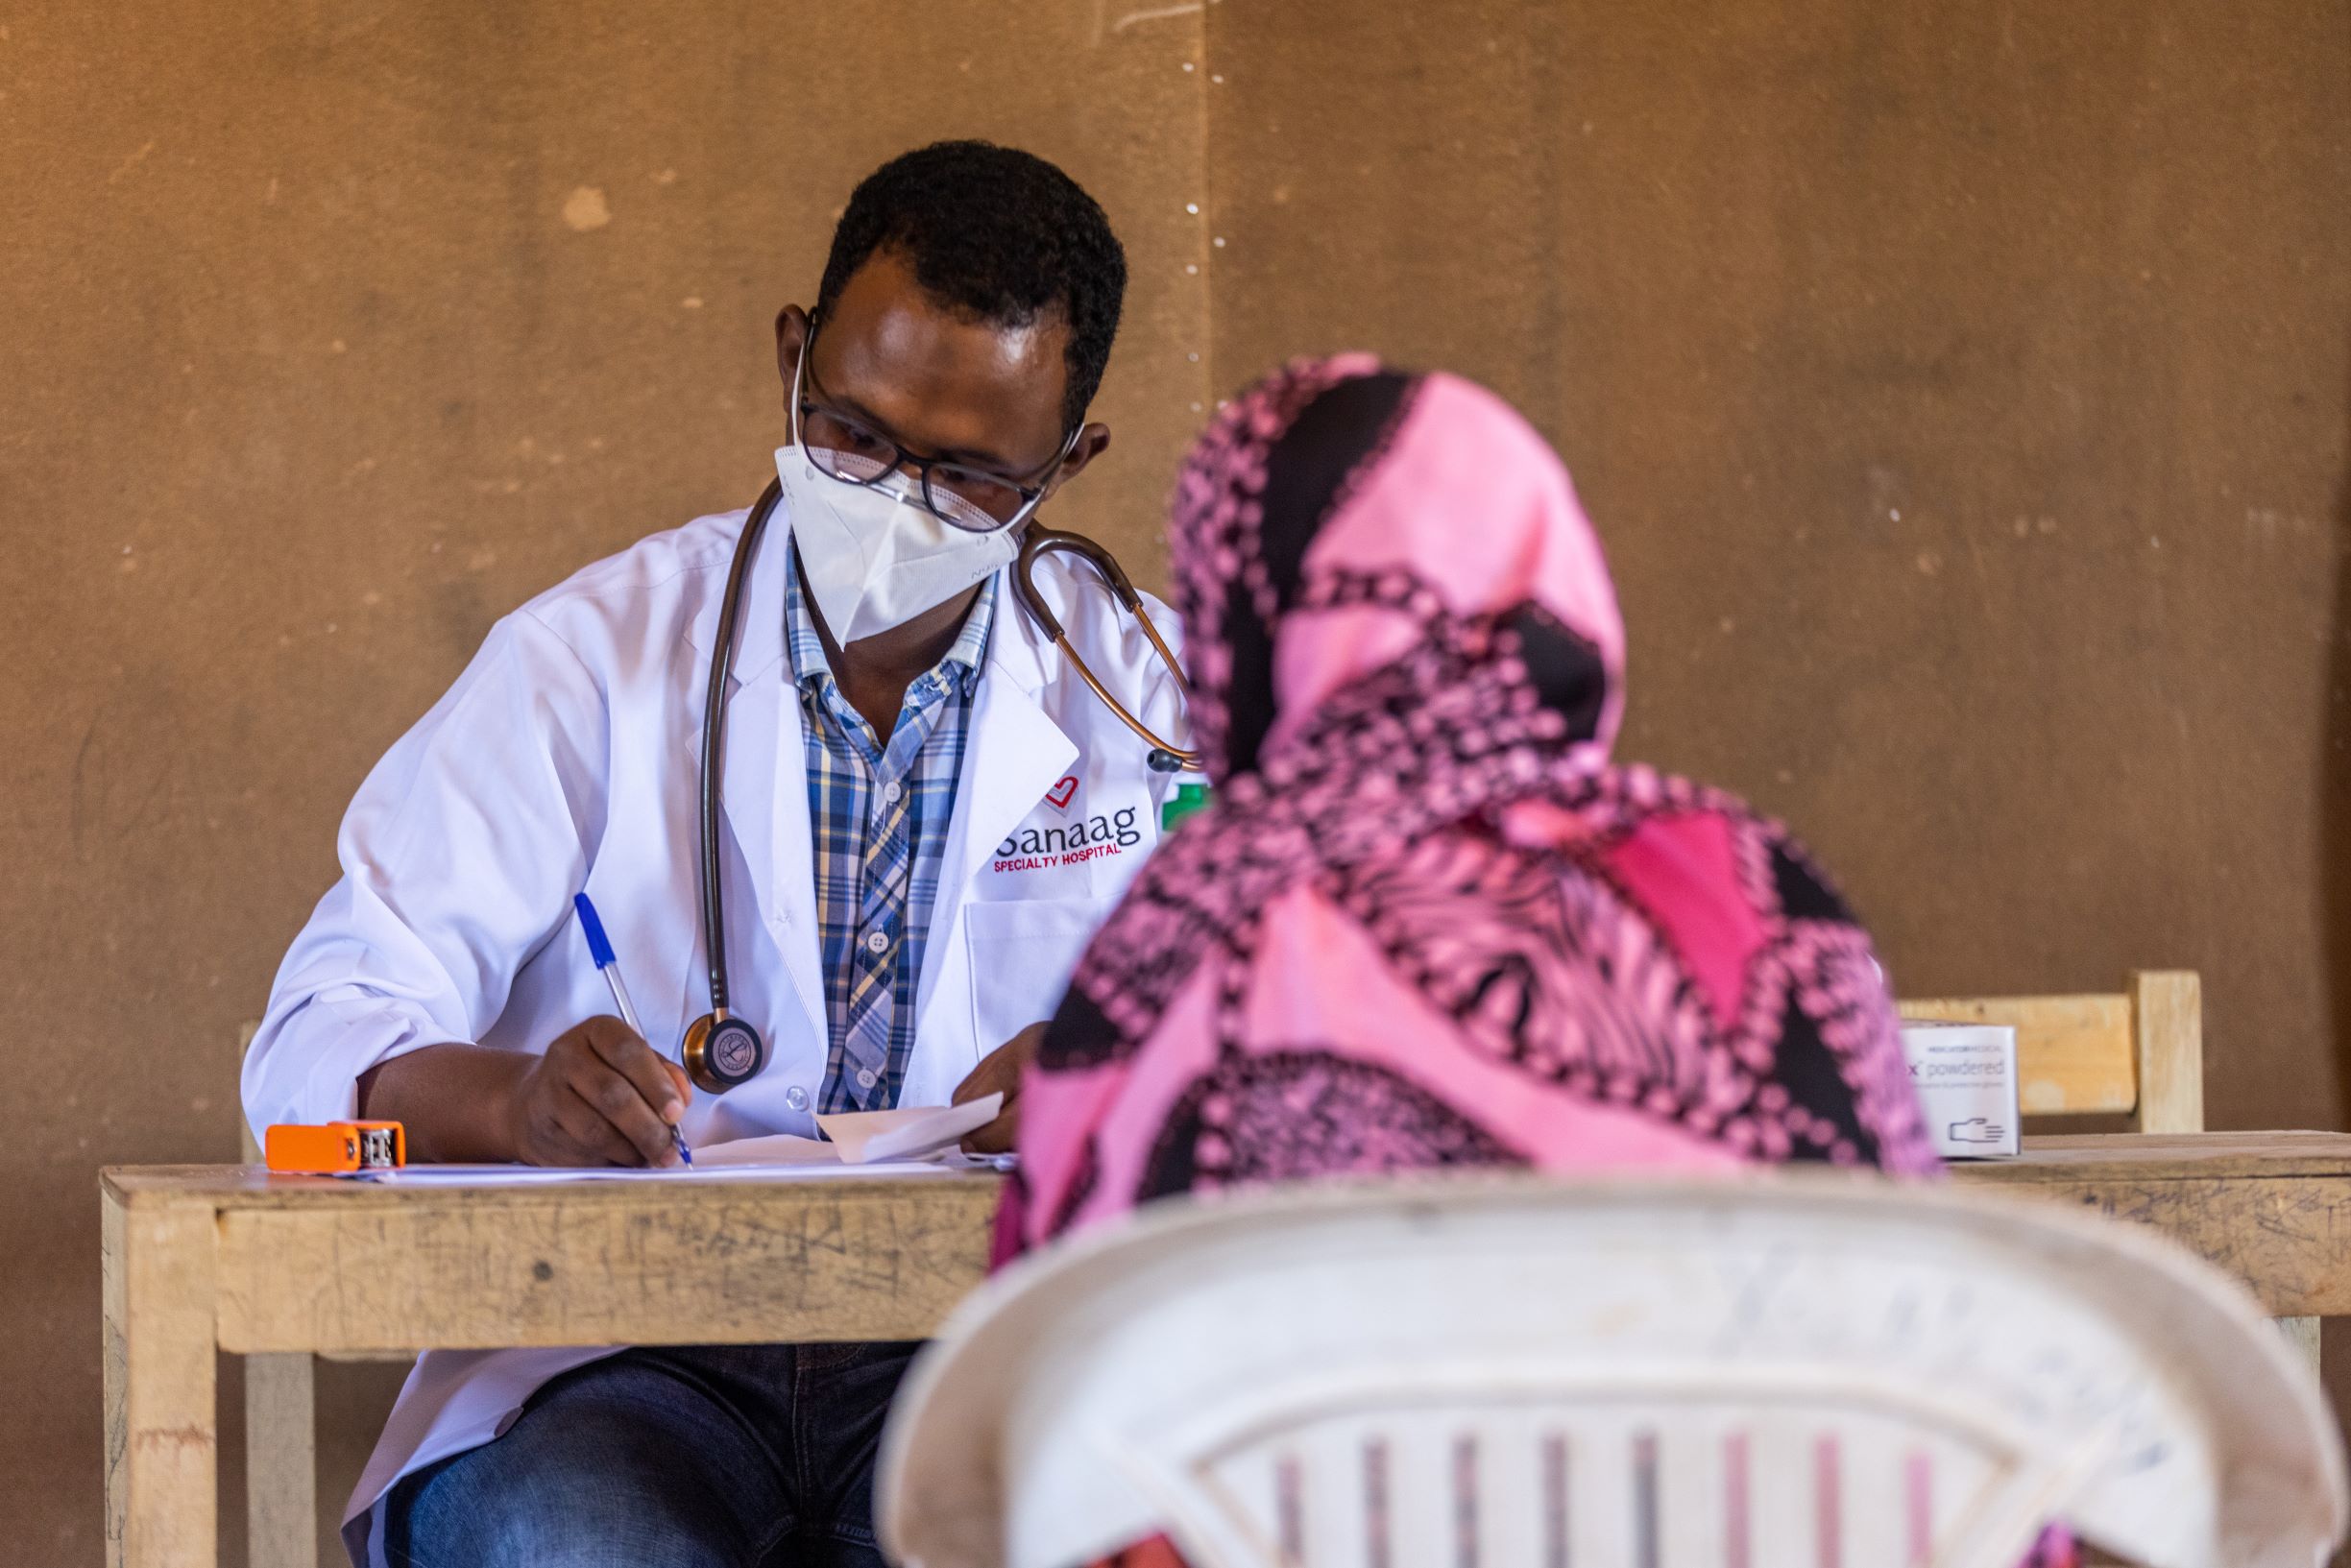 A local doctor conducts a visit with a community member.